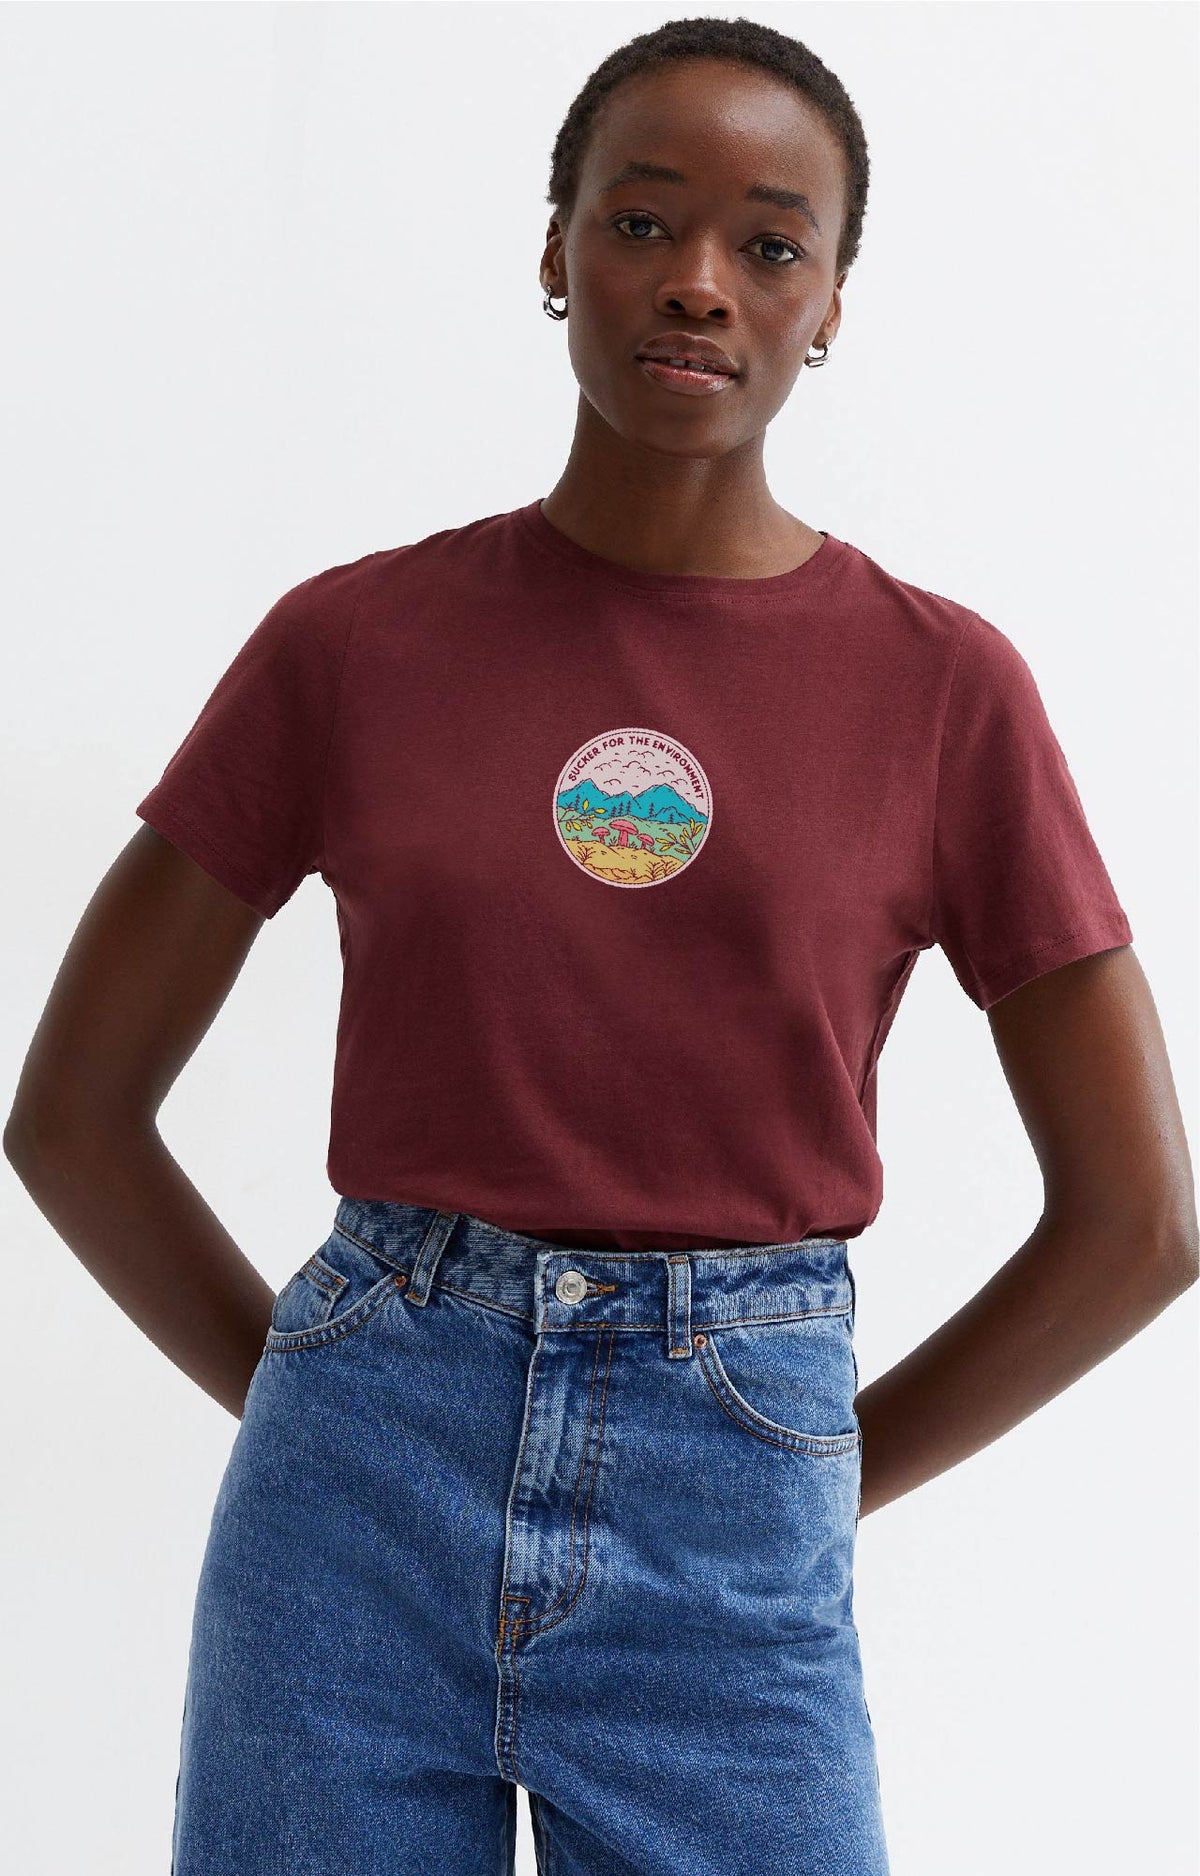 Sucker for the Environment - Unisex Relaxed Organic Cotton T-Shirt - Limited Colours M - XXXL